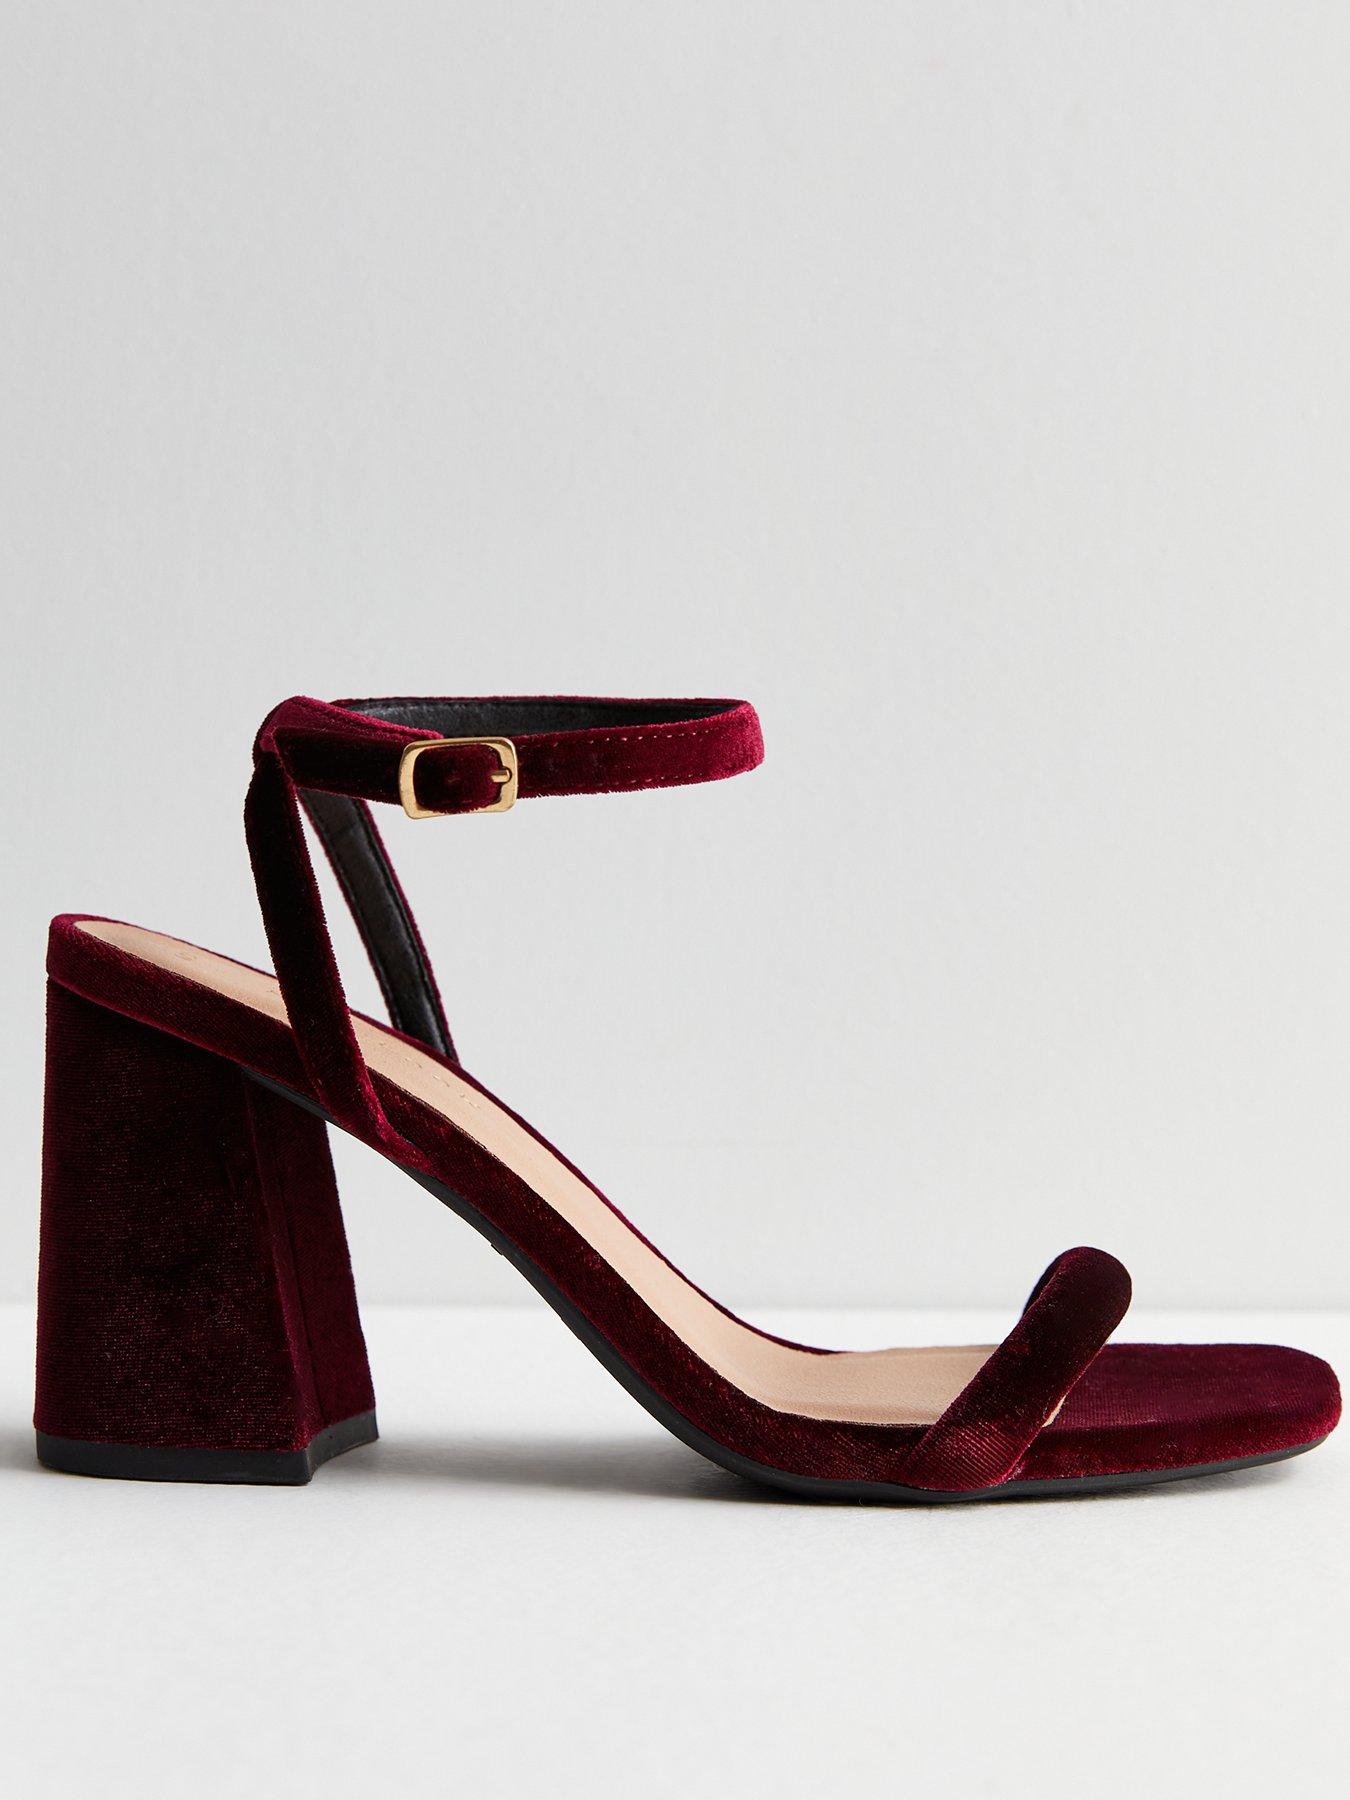 Women's Heeled Sandals | Explore our New Arrivals | ZARA United States